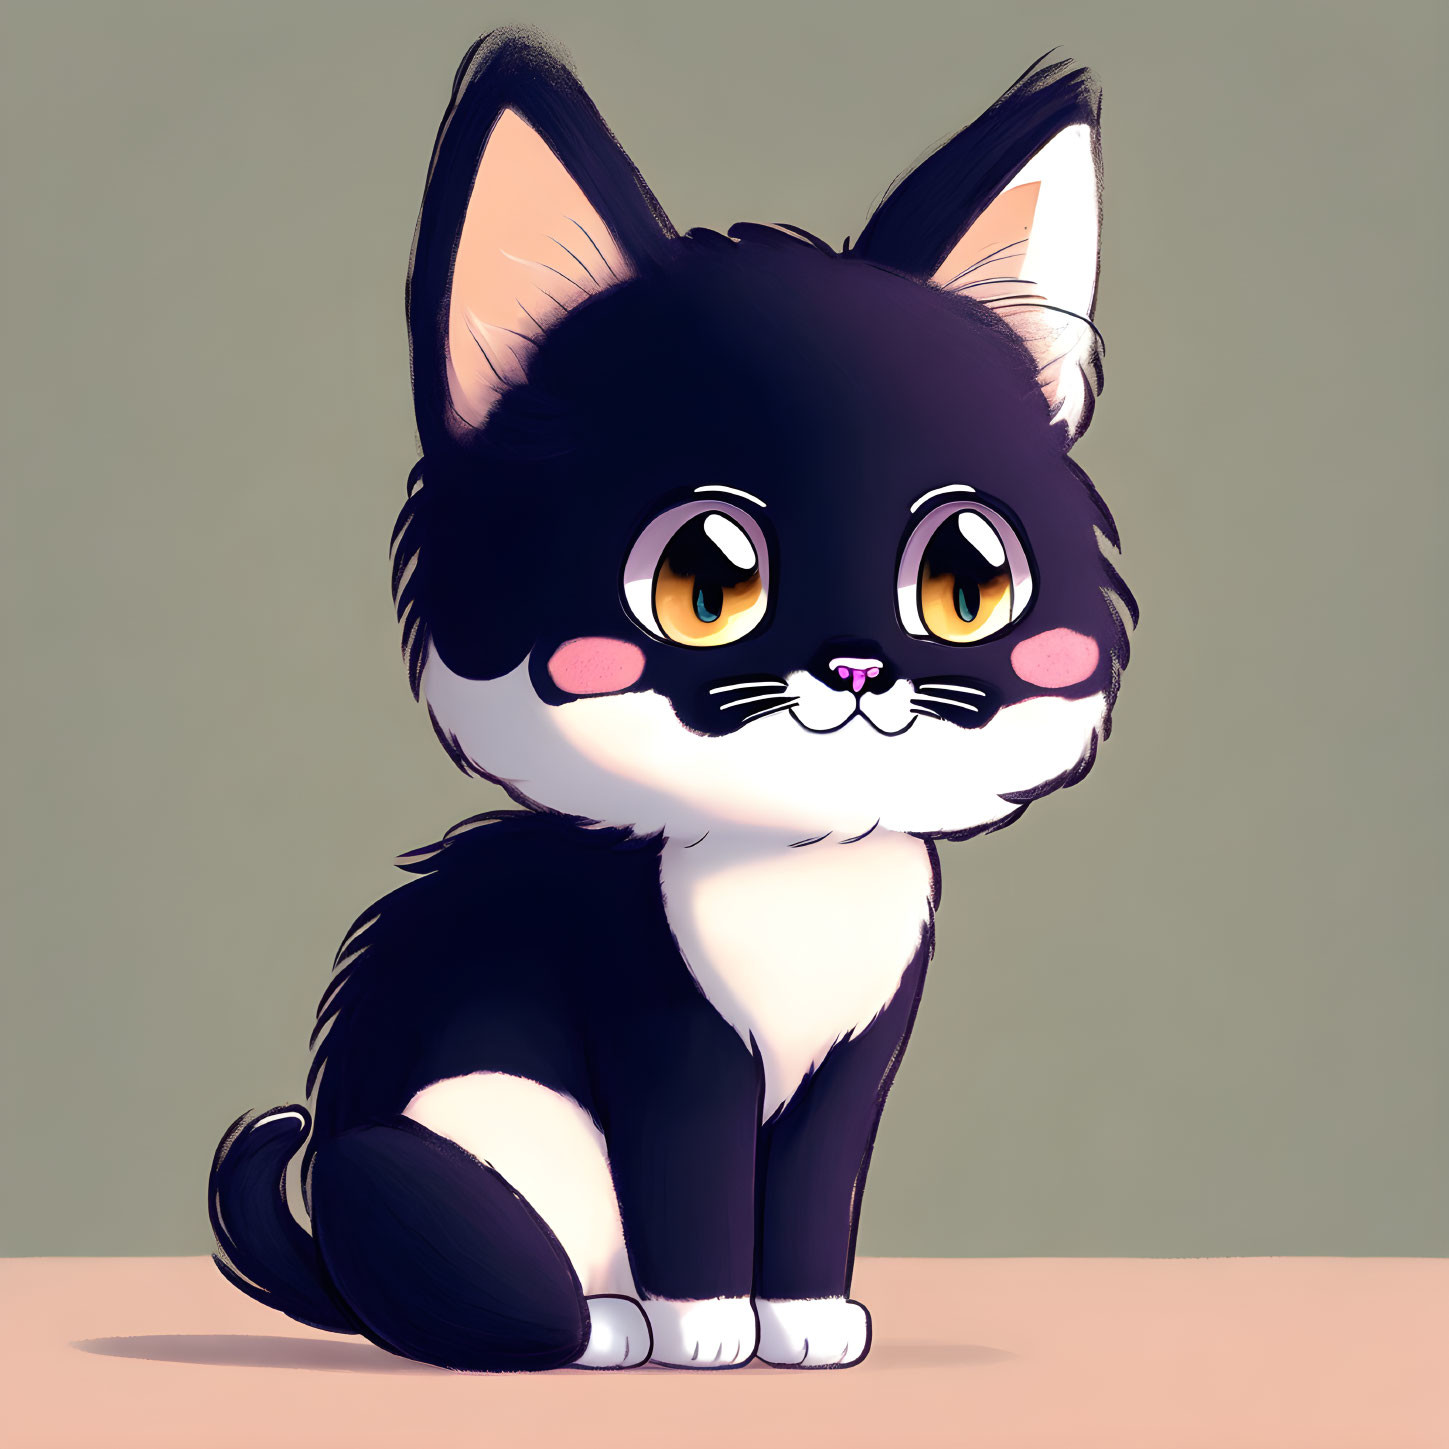 Adorable black and white kitten illustration with large eyes